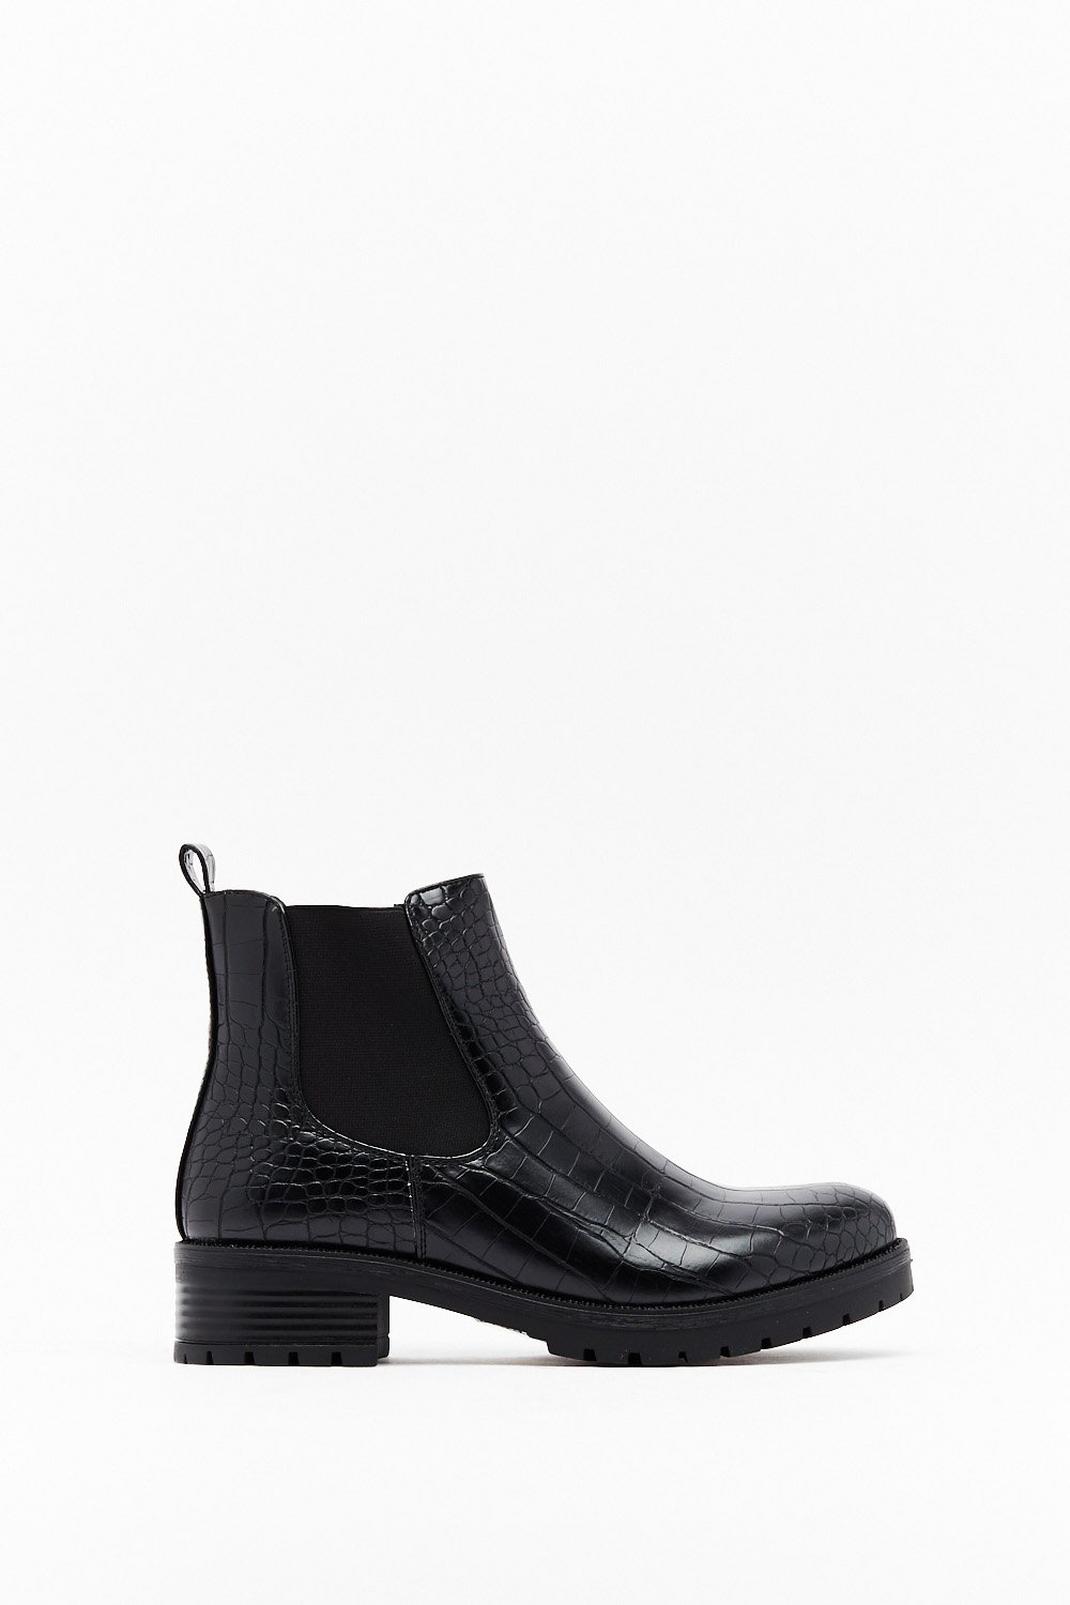 Don't Croc the Boat Faux Leather Chelsea Boots image number 1